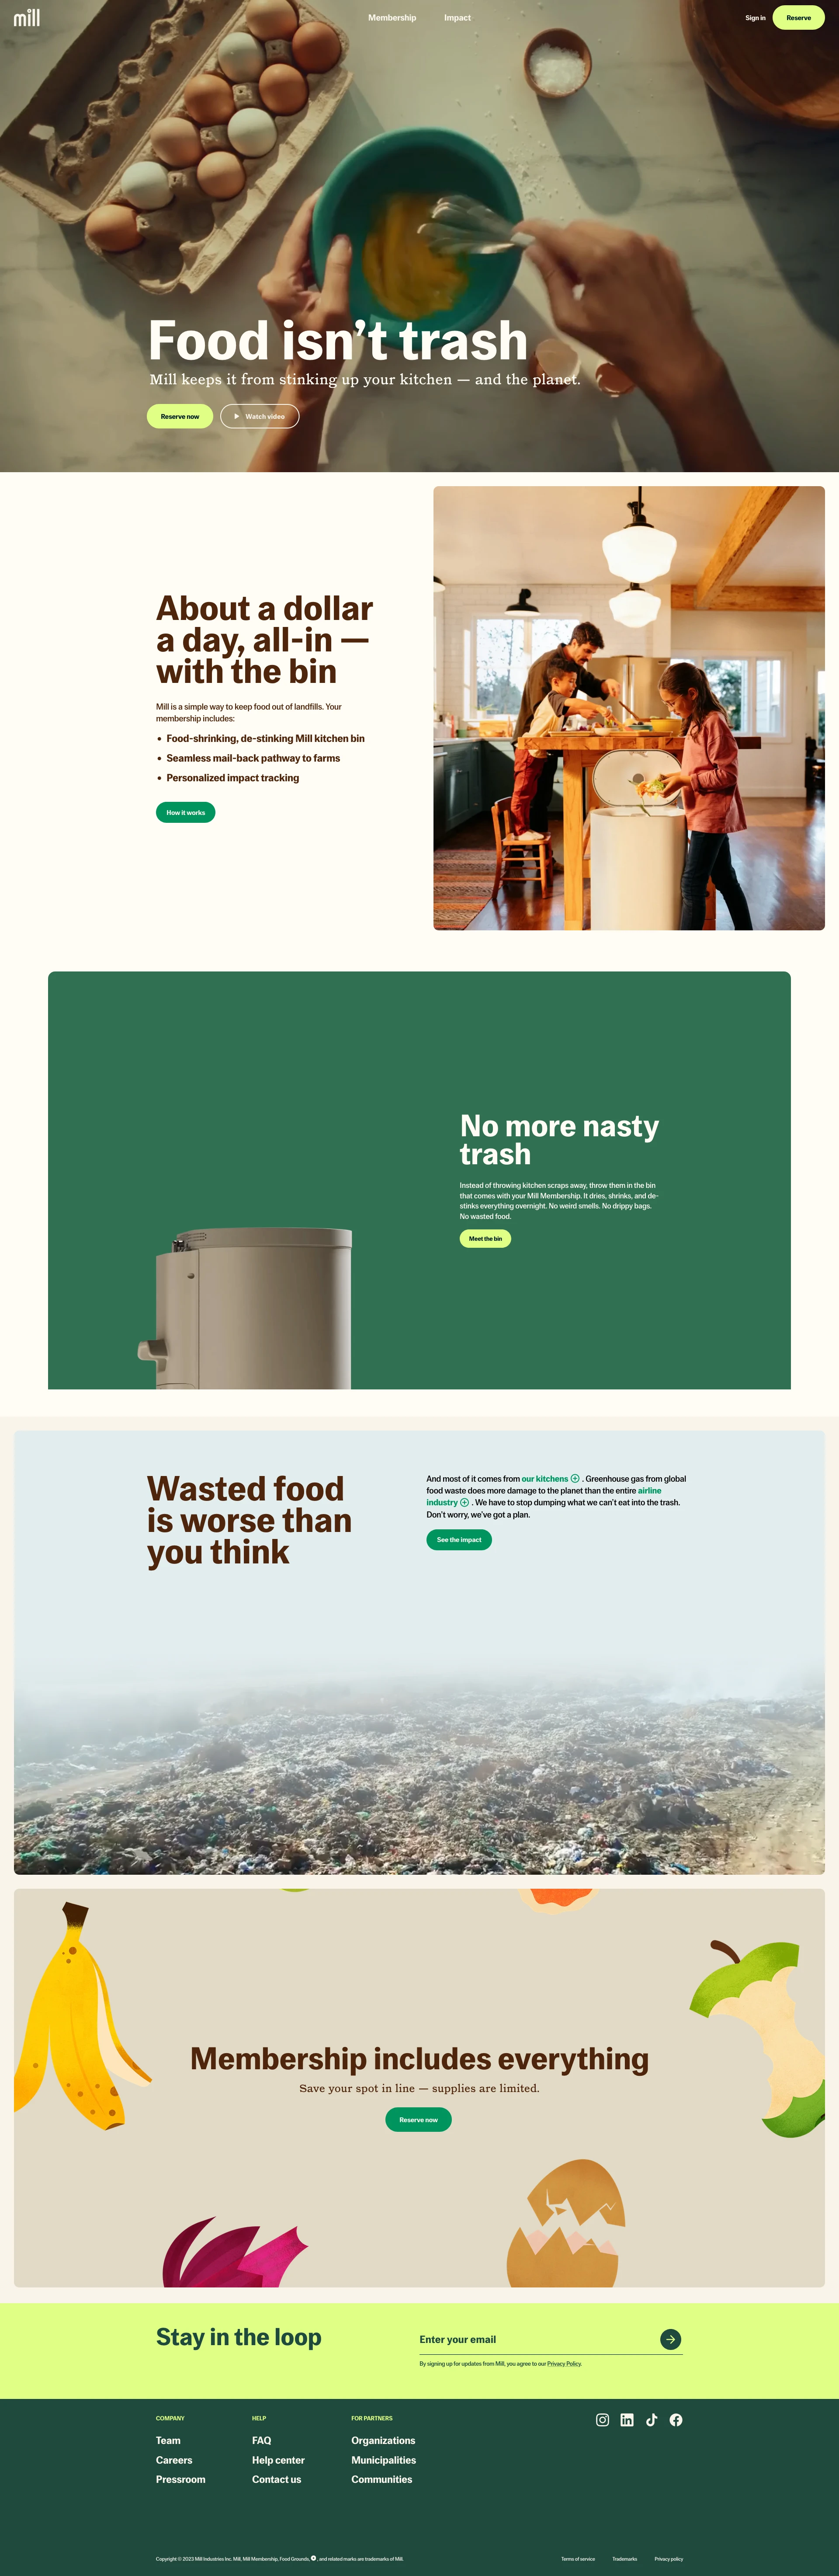 Mill Landing Page Example: Mill keeps your kitchen — and the planet — clean.